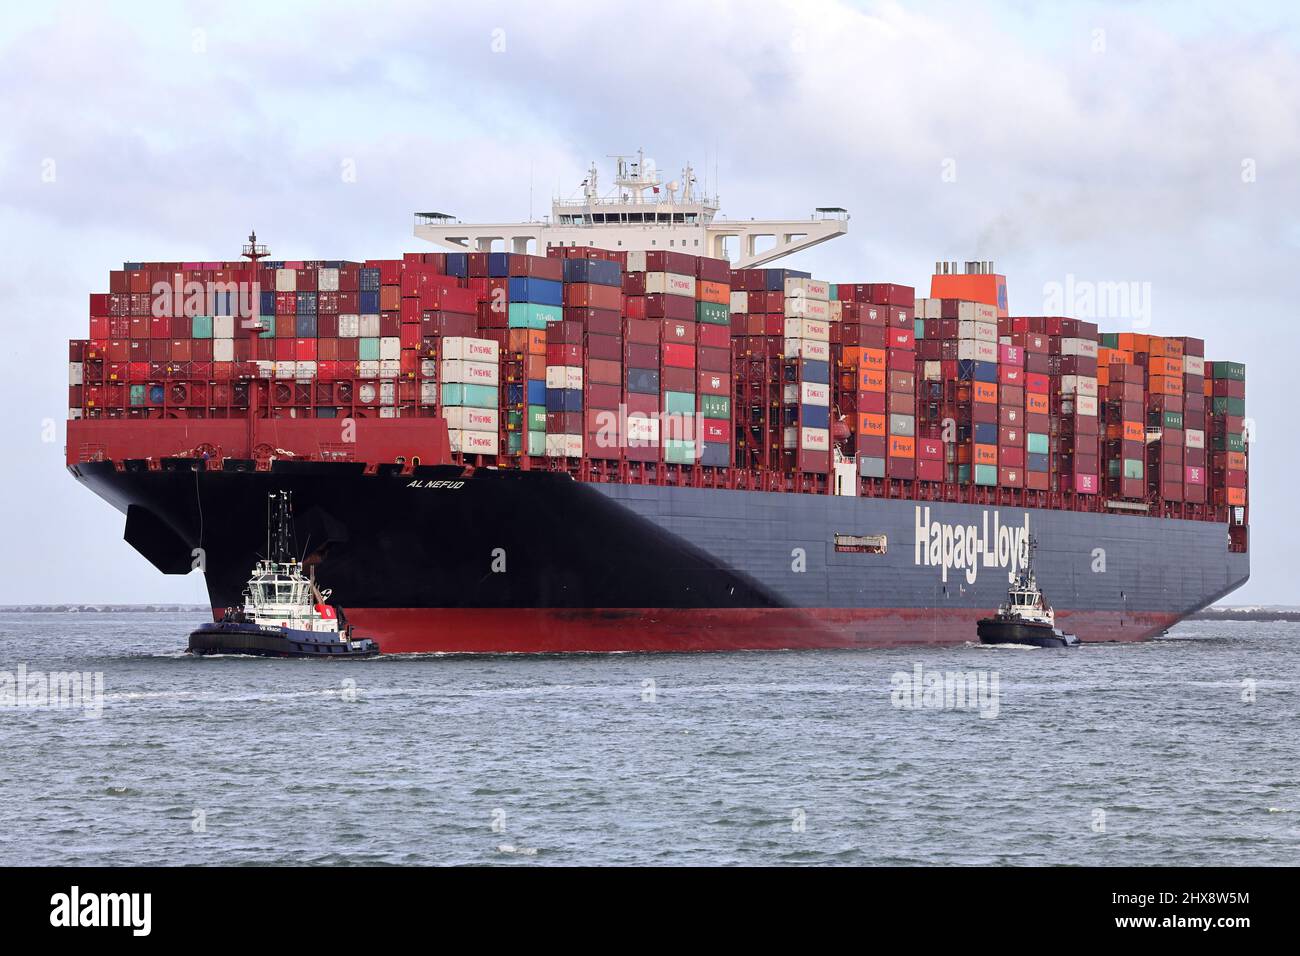 The container ship Al Nefud arrives in the port of Rotterdam on January 30, 2022. Stock Photo